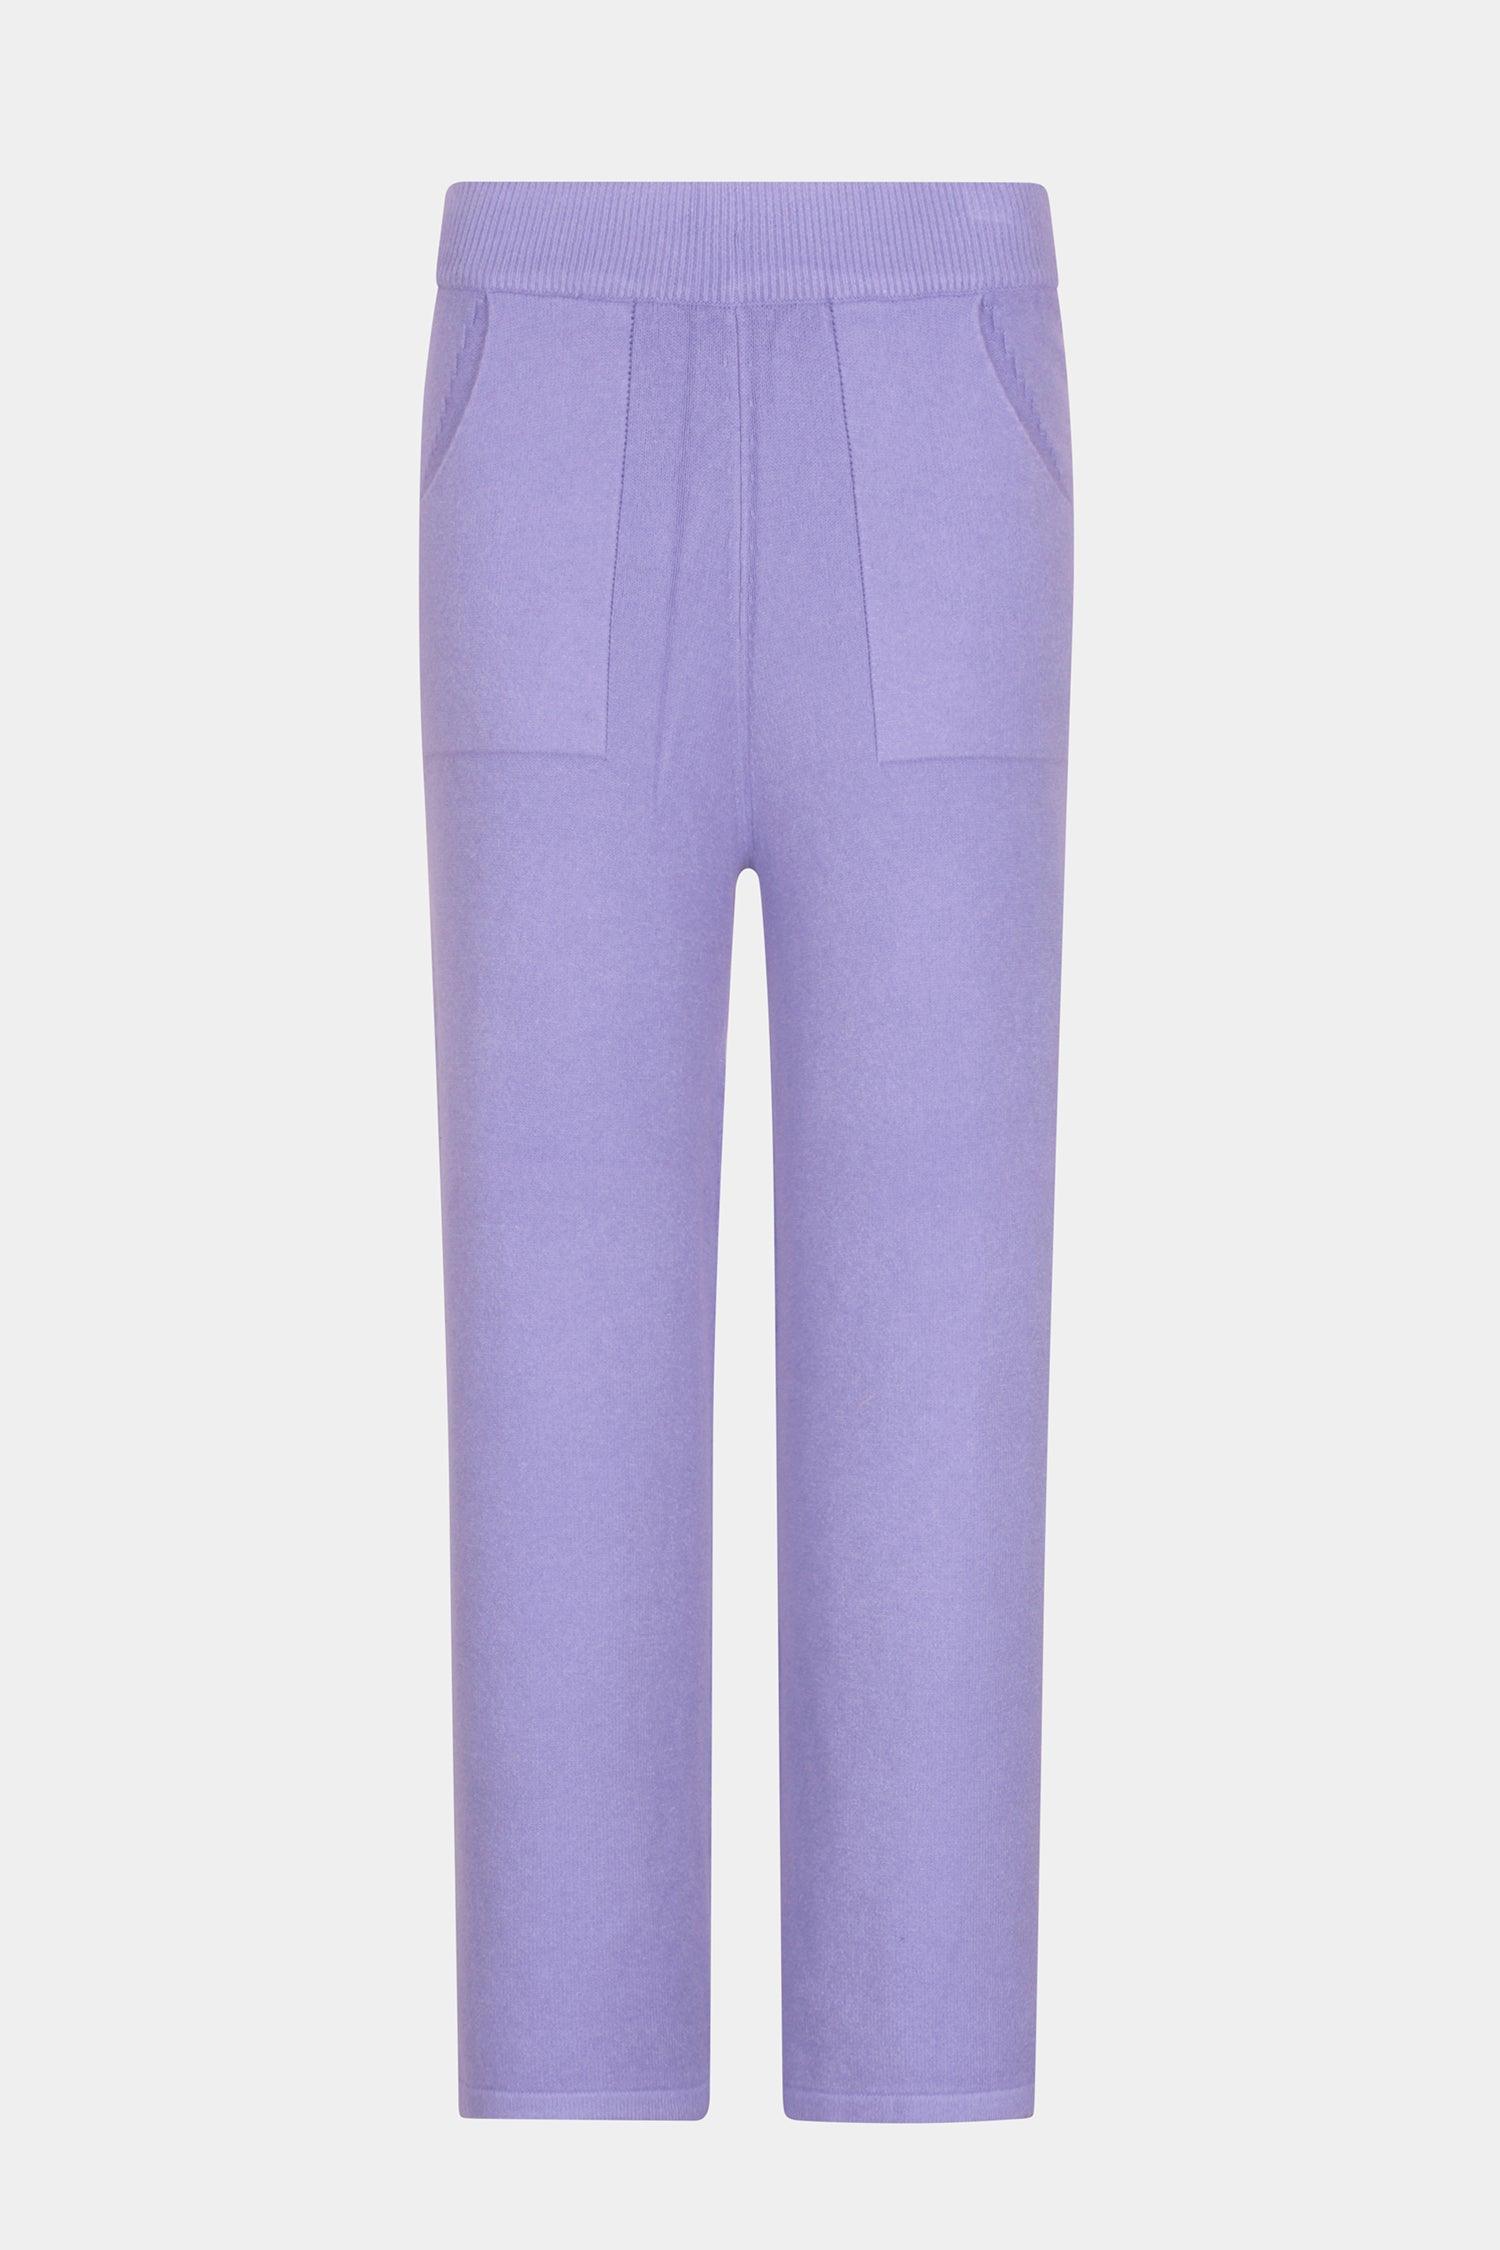 Melody Trousers Cable Side - Fenella